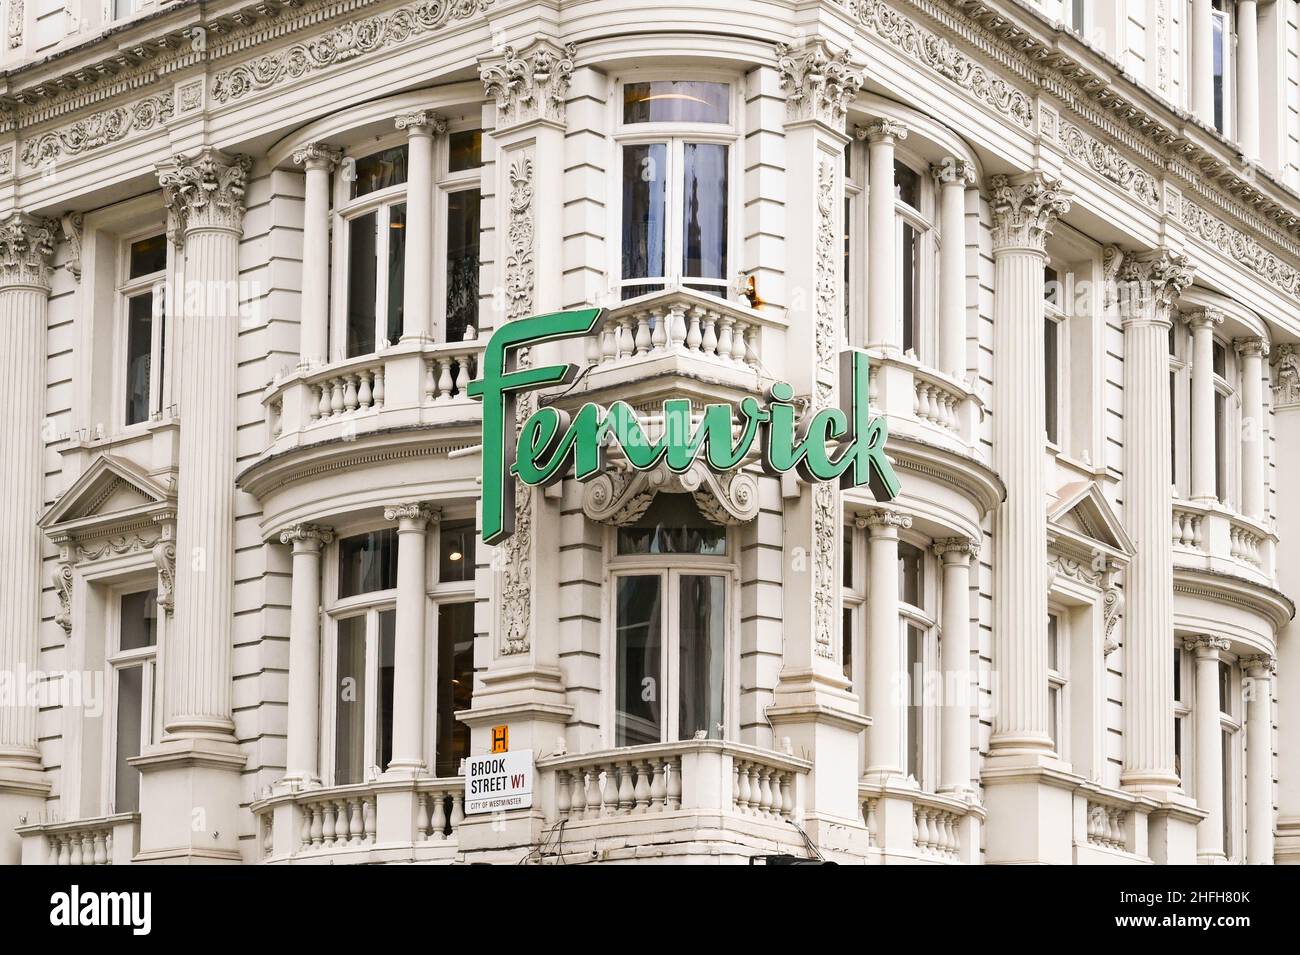 London, England - June 2020: Sign above the entrance to the Fenwick department store in central London Stock Photo